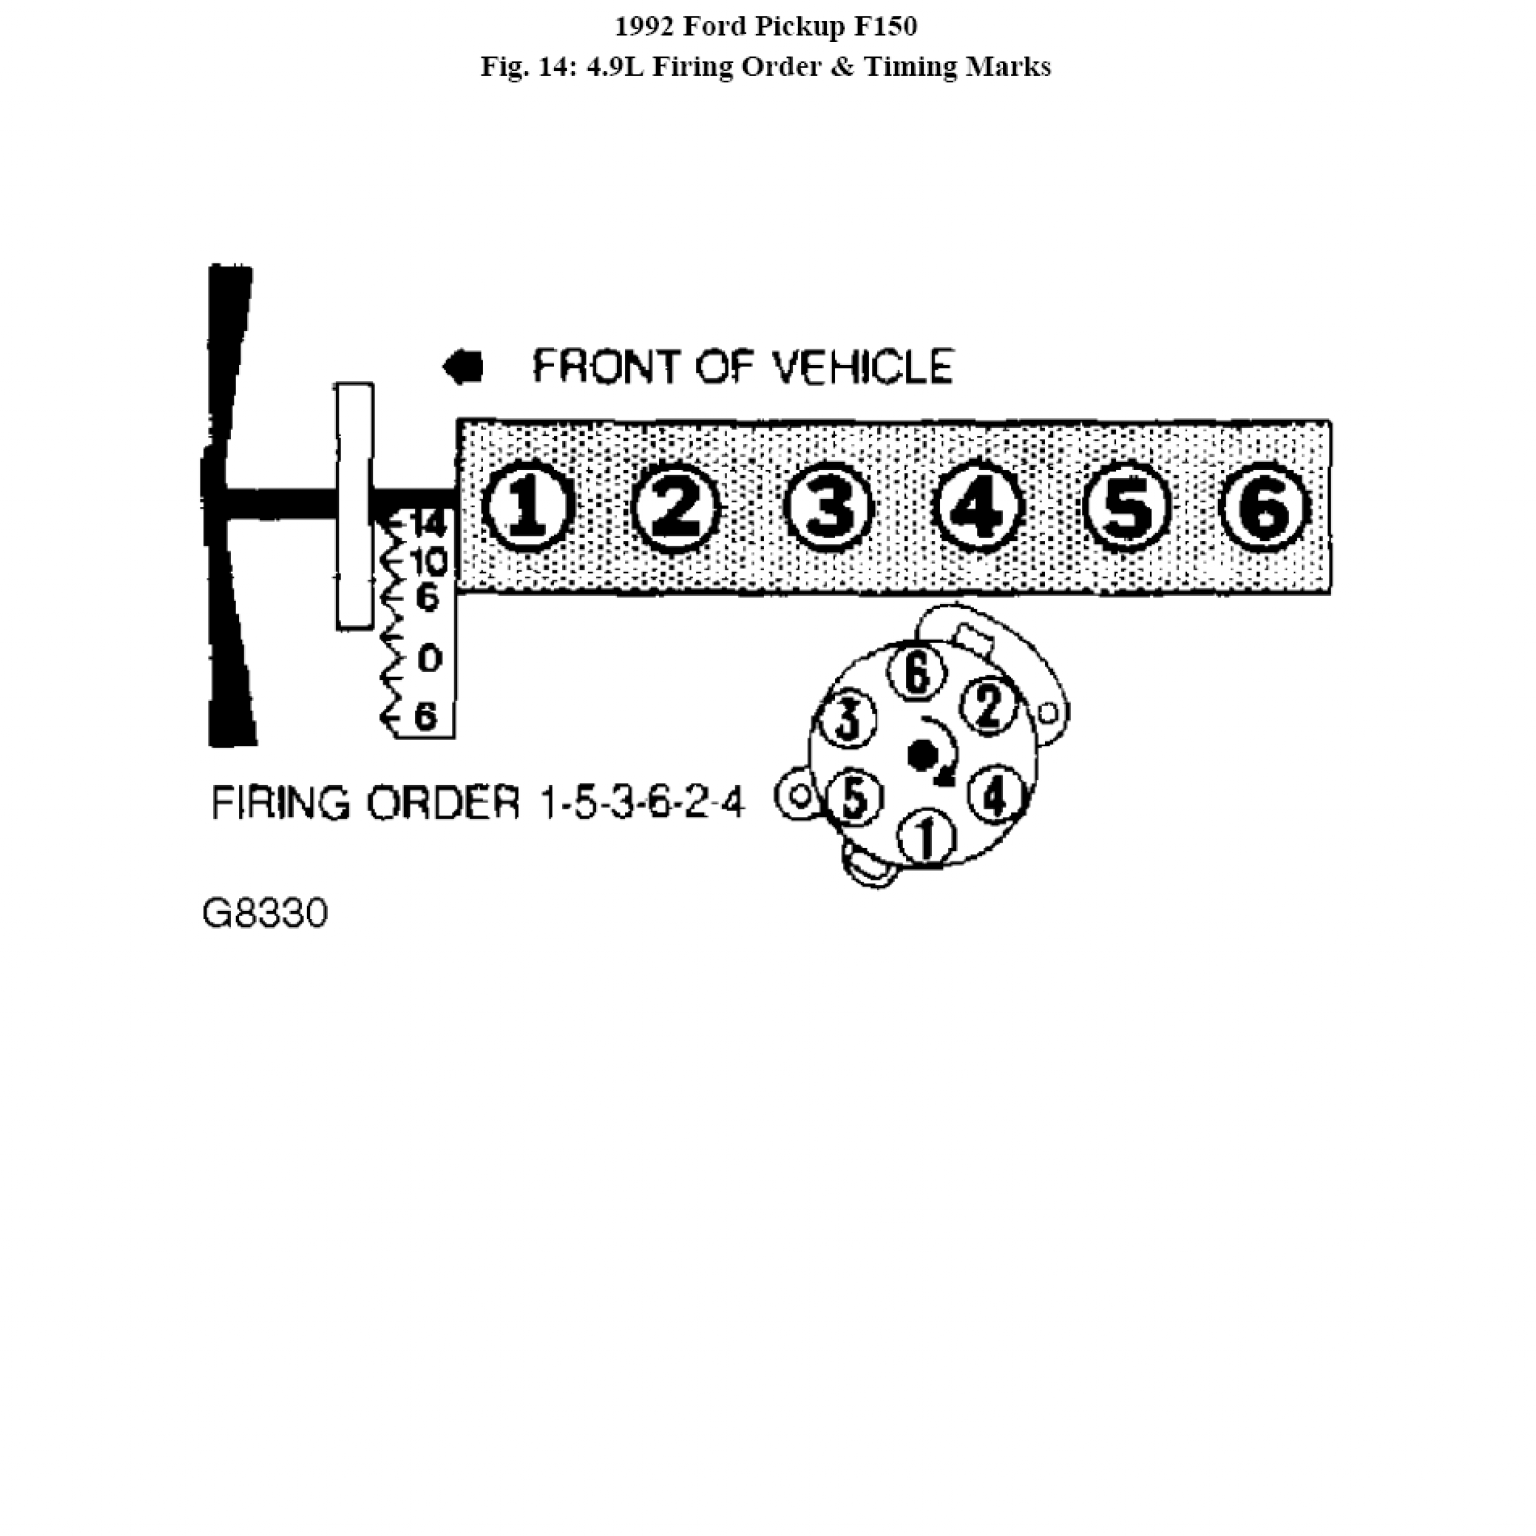 Ford 6 Cylinder Engine Diagram - Wiring Diagram Cycle | Wiring and